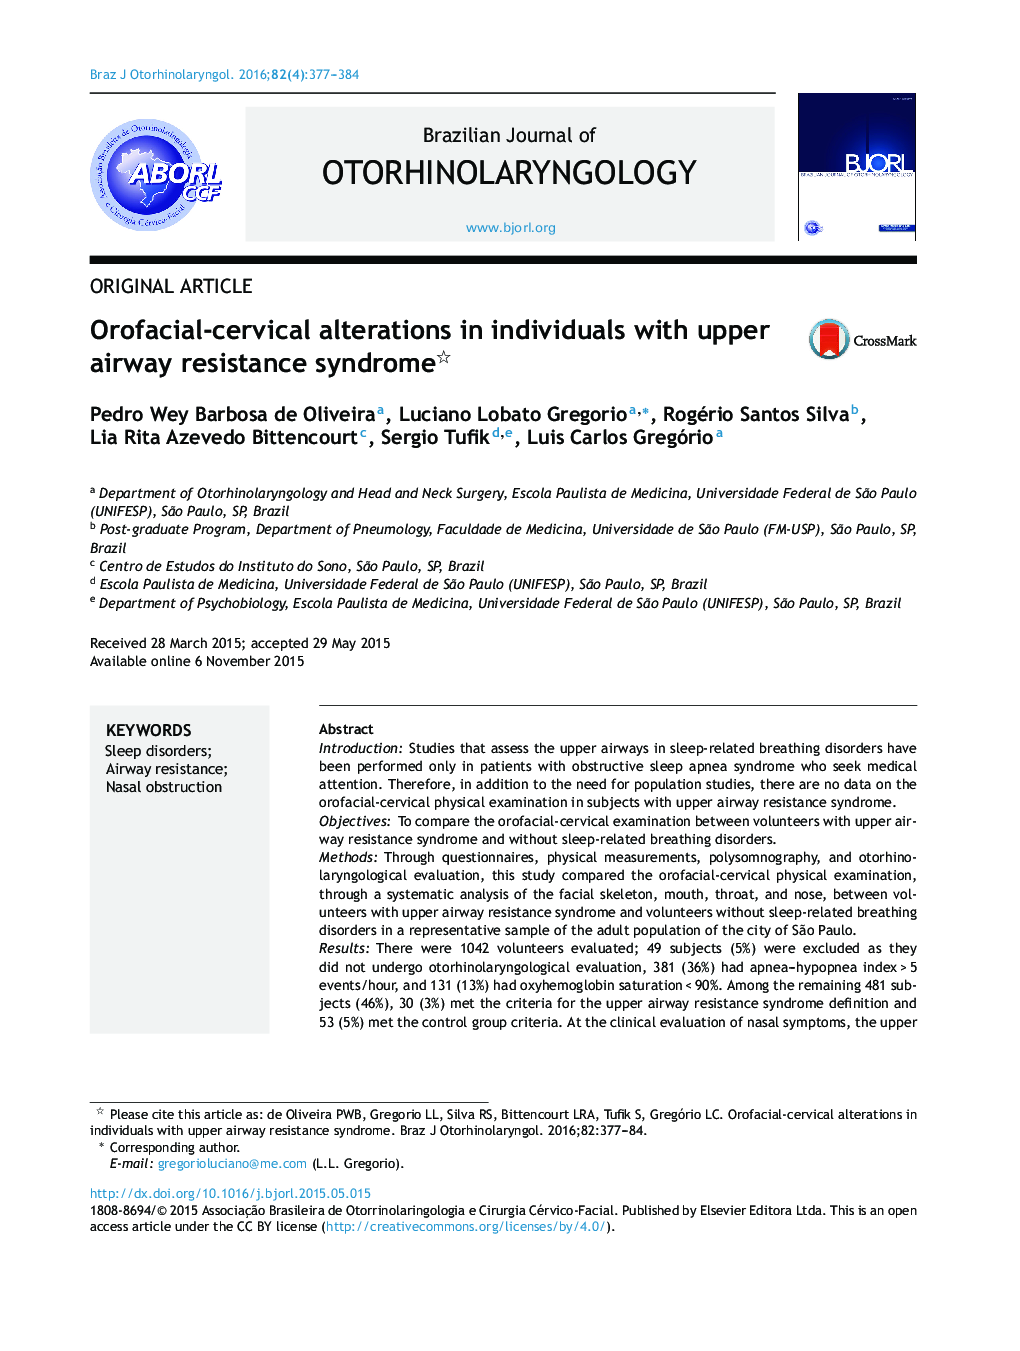 Orofacial-cervical alterations in individuals with upper airway resistance syndrome 